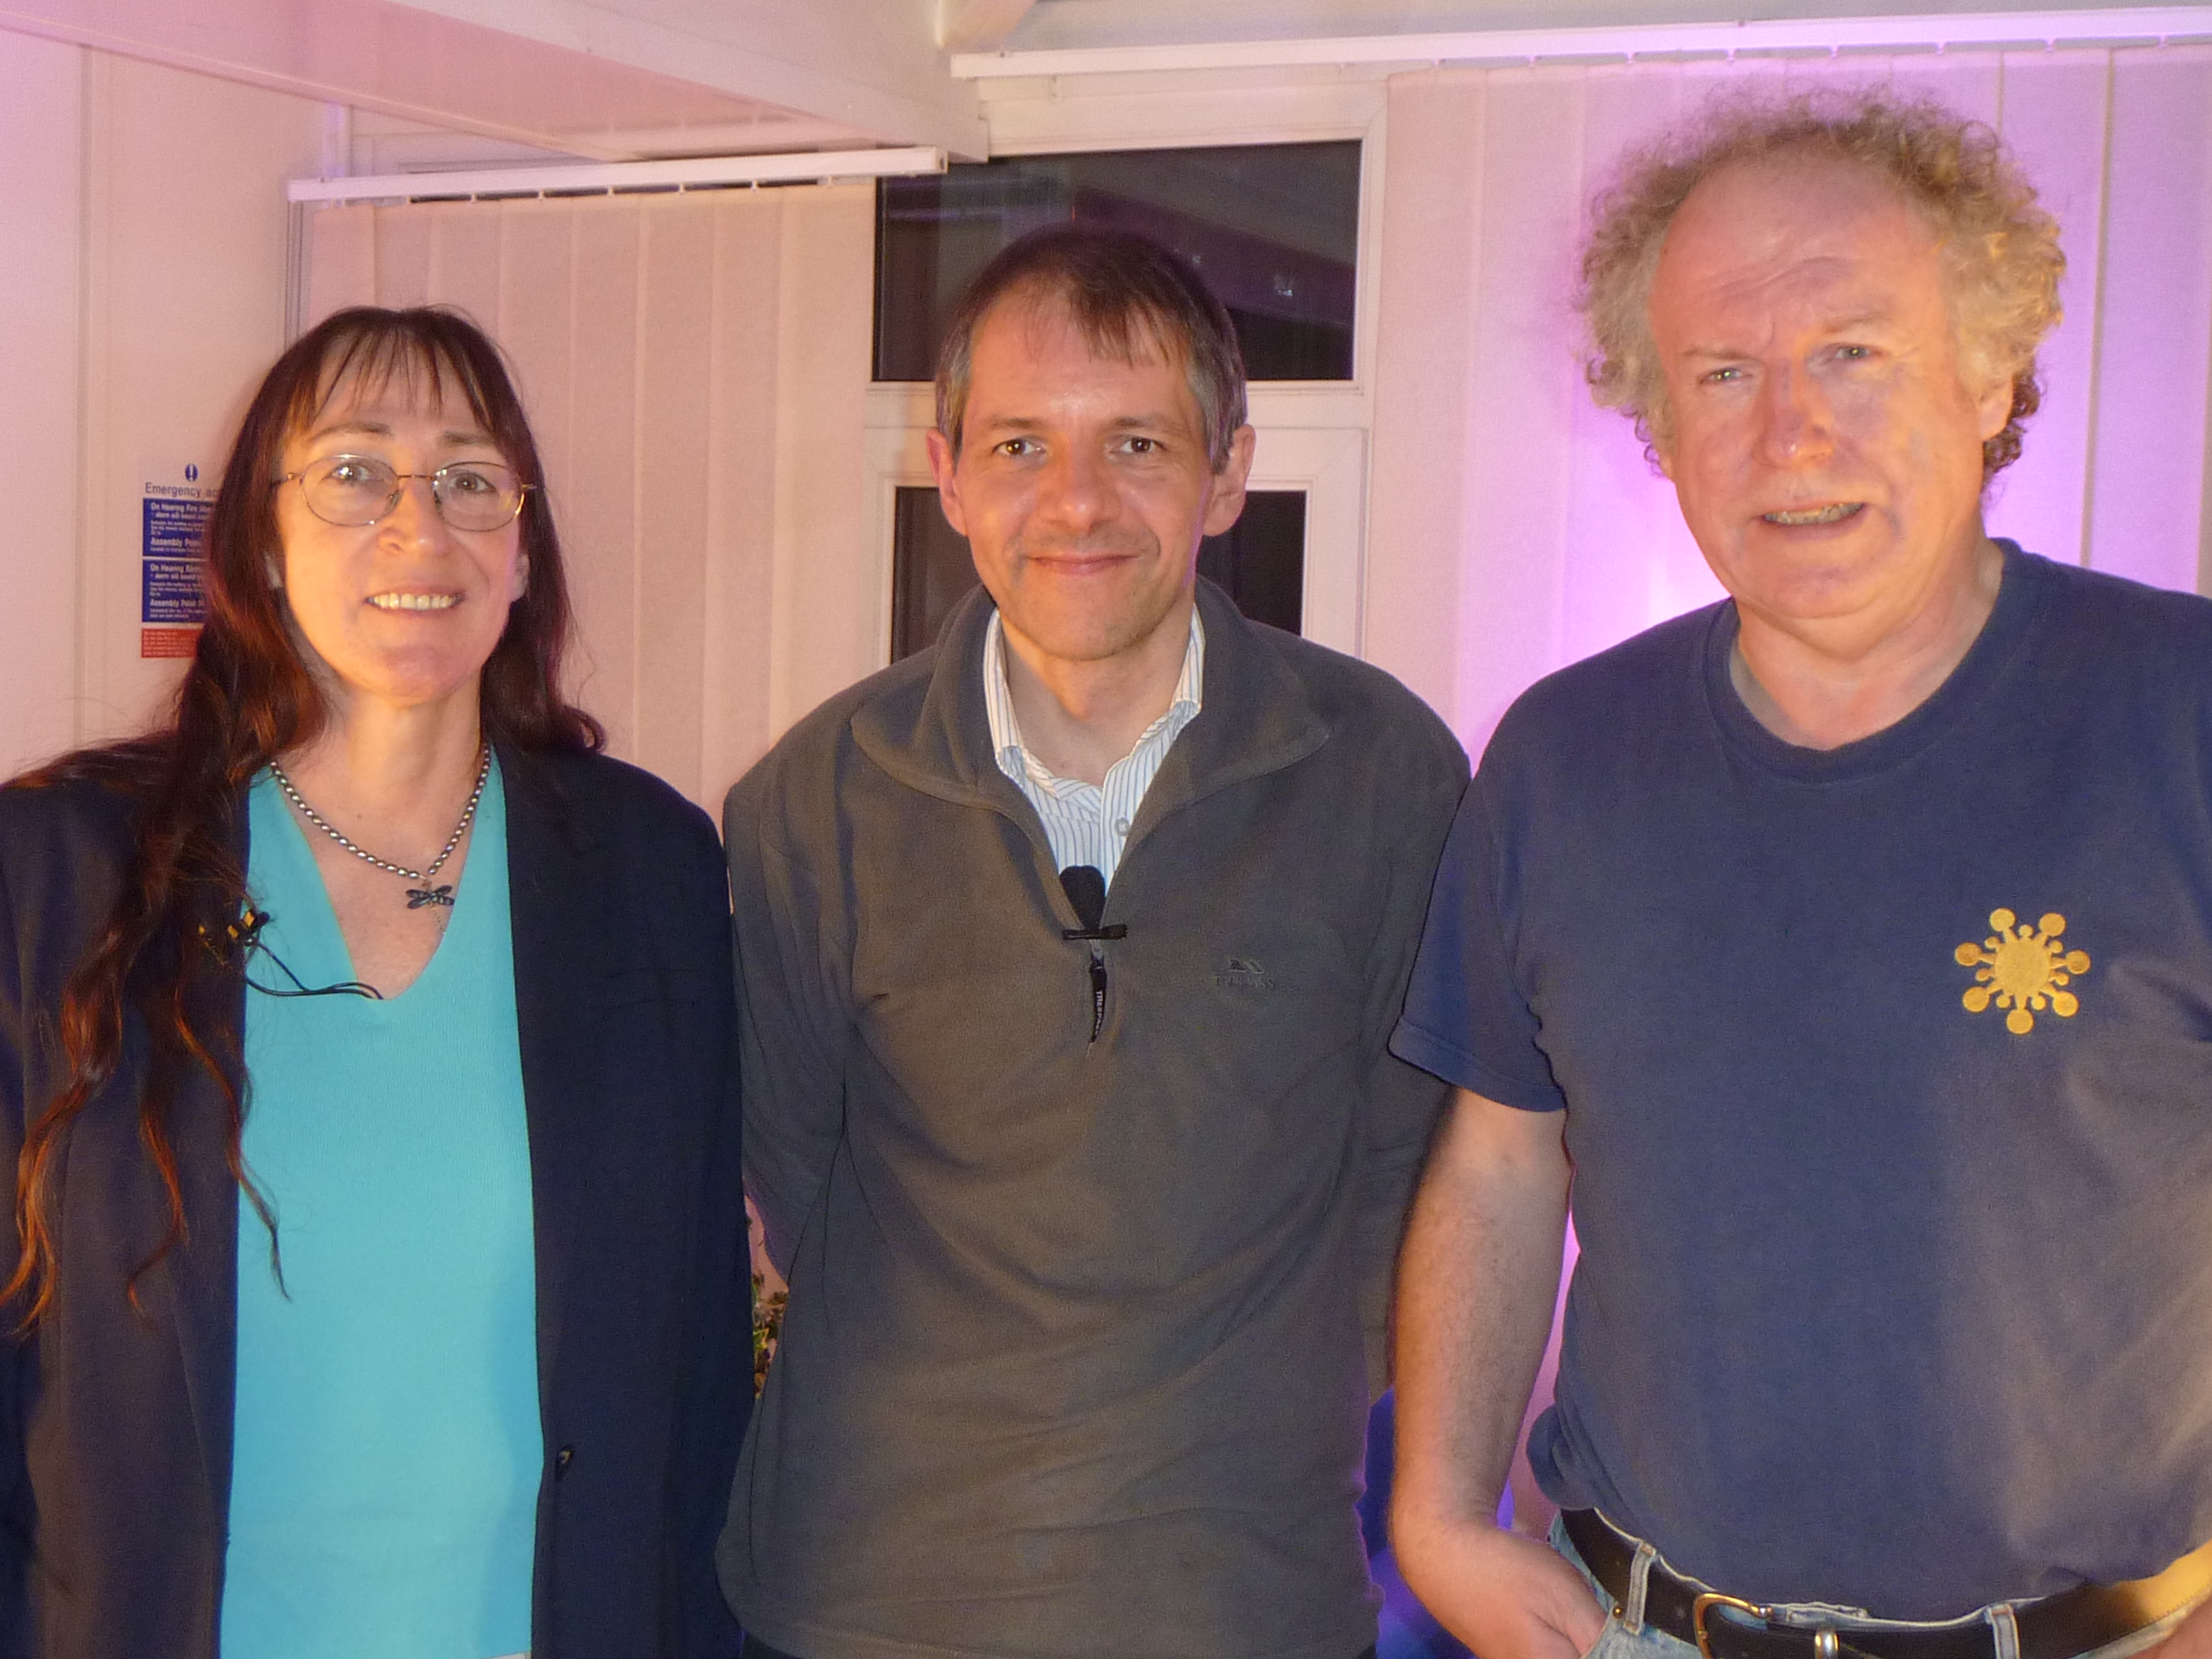 Dr Judy Wood, Andrew Johnson with AMMACH videographer Miles Johnston, of MJMedia. After the Ammach On The Road interview with the two 9-11 investigators and authors, at Northampton University in Nov 2012